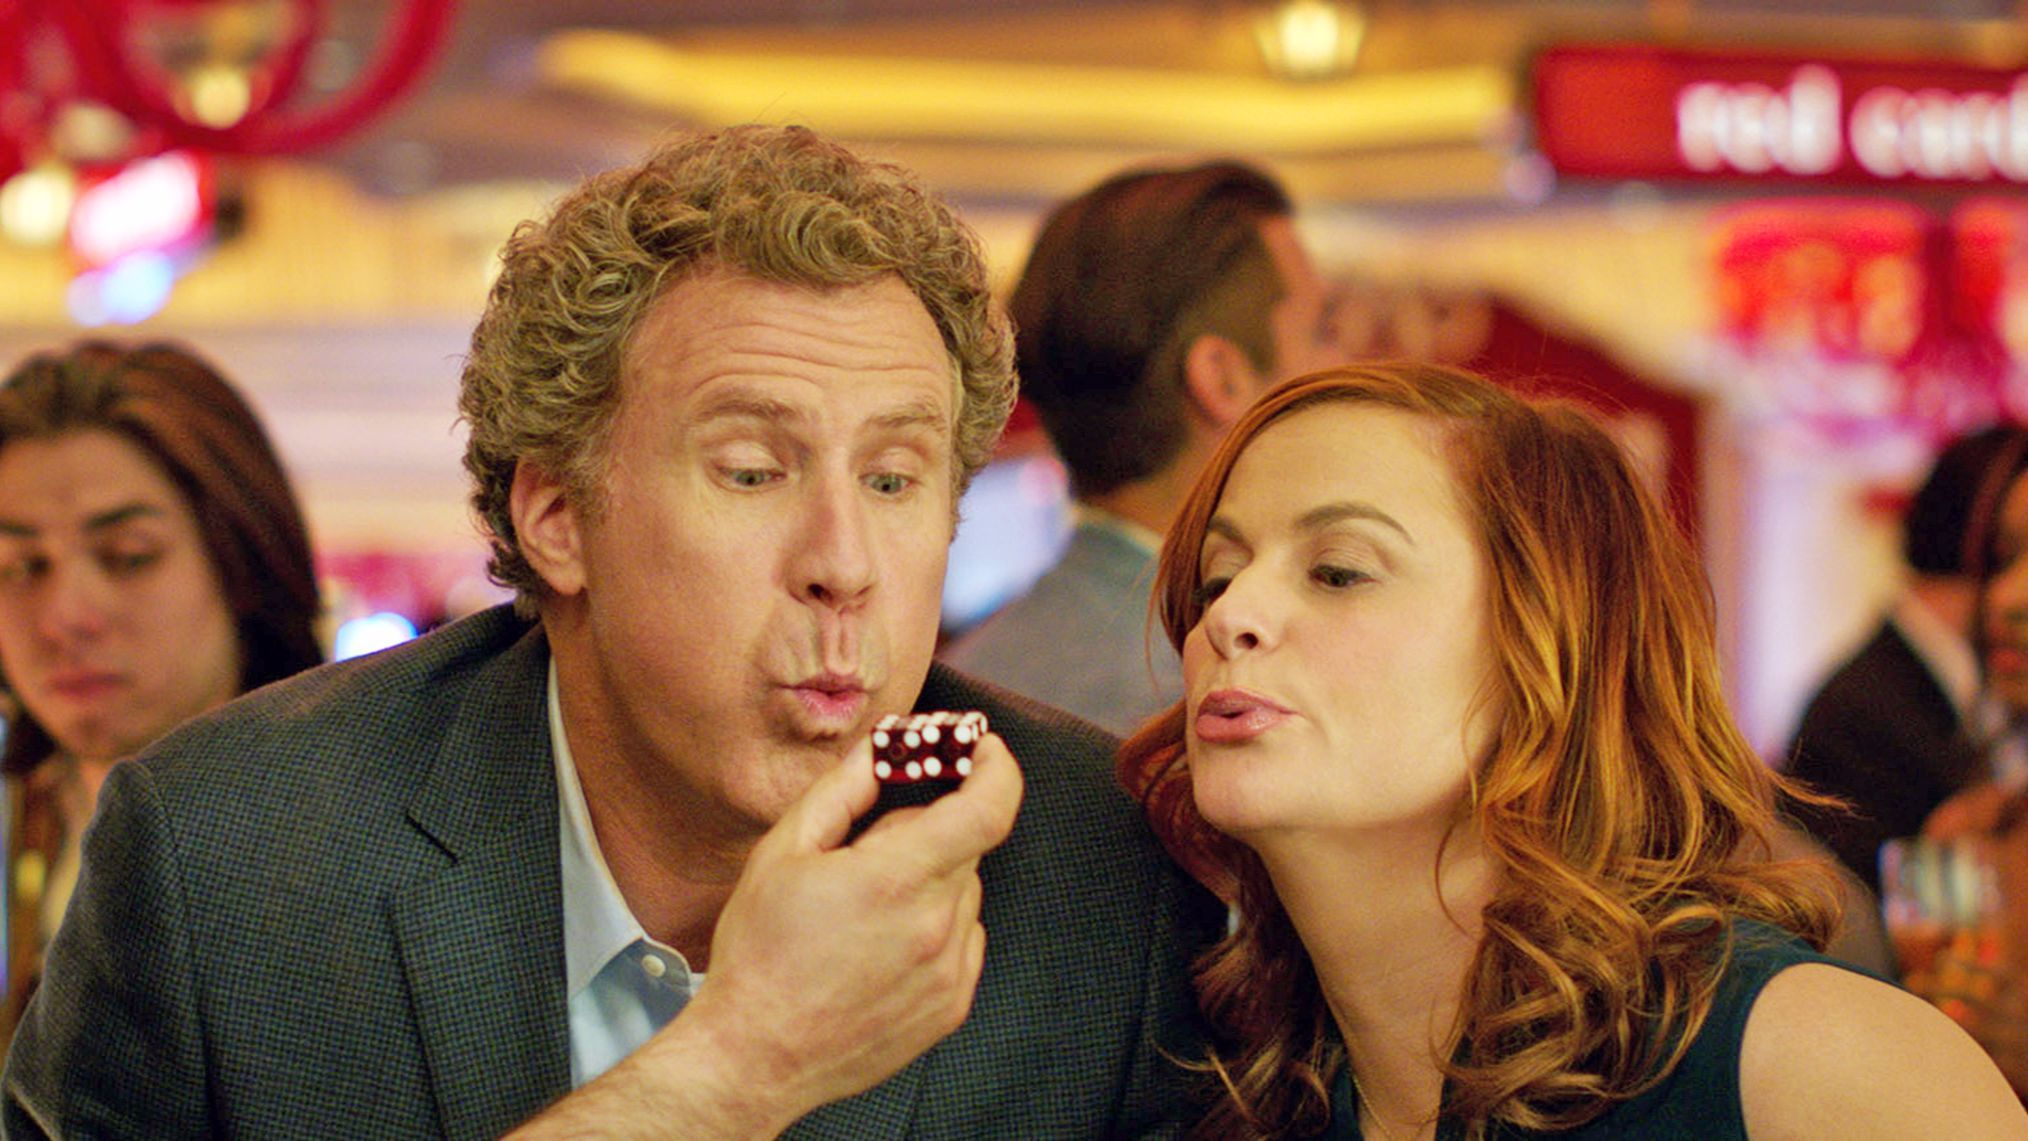 Will Ferrell as Scott Johansen and Amy Poehler as Kate Johansen in the New Line Cinema and Village Roadshow Pictures comedy "The House."